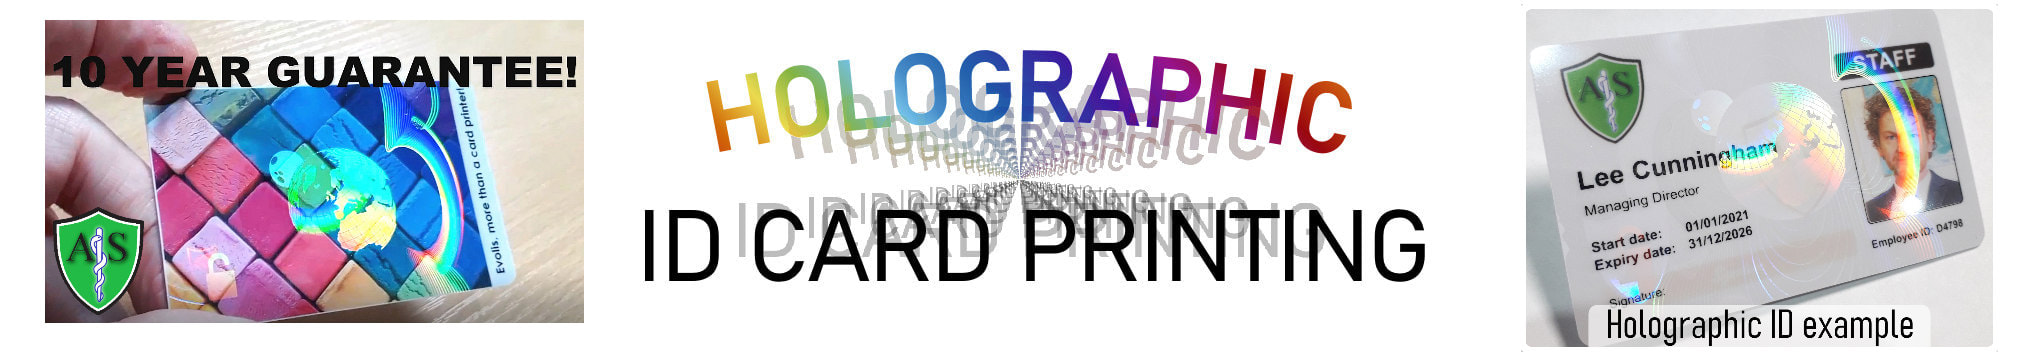 TOWN holographic ID card print service. Employee Identity cards with hologram or holograph security mark.